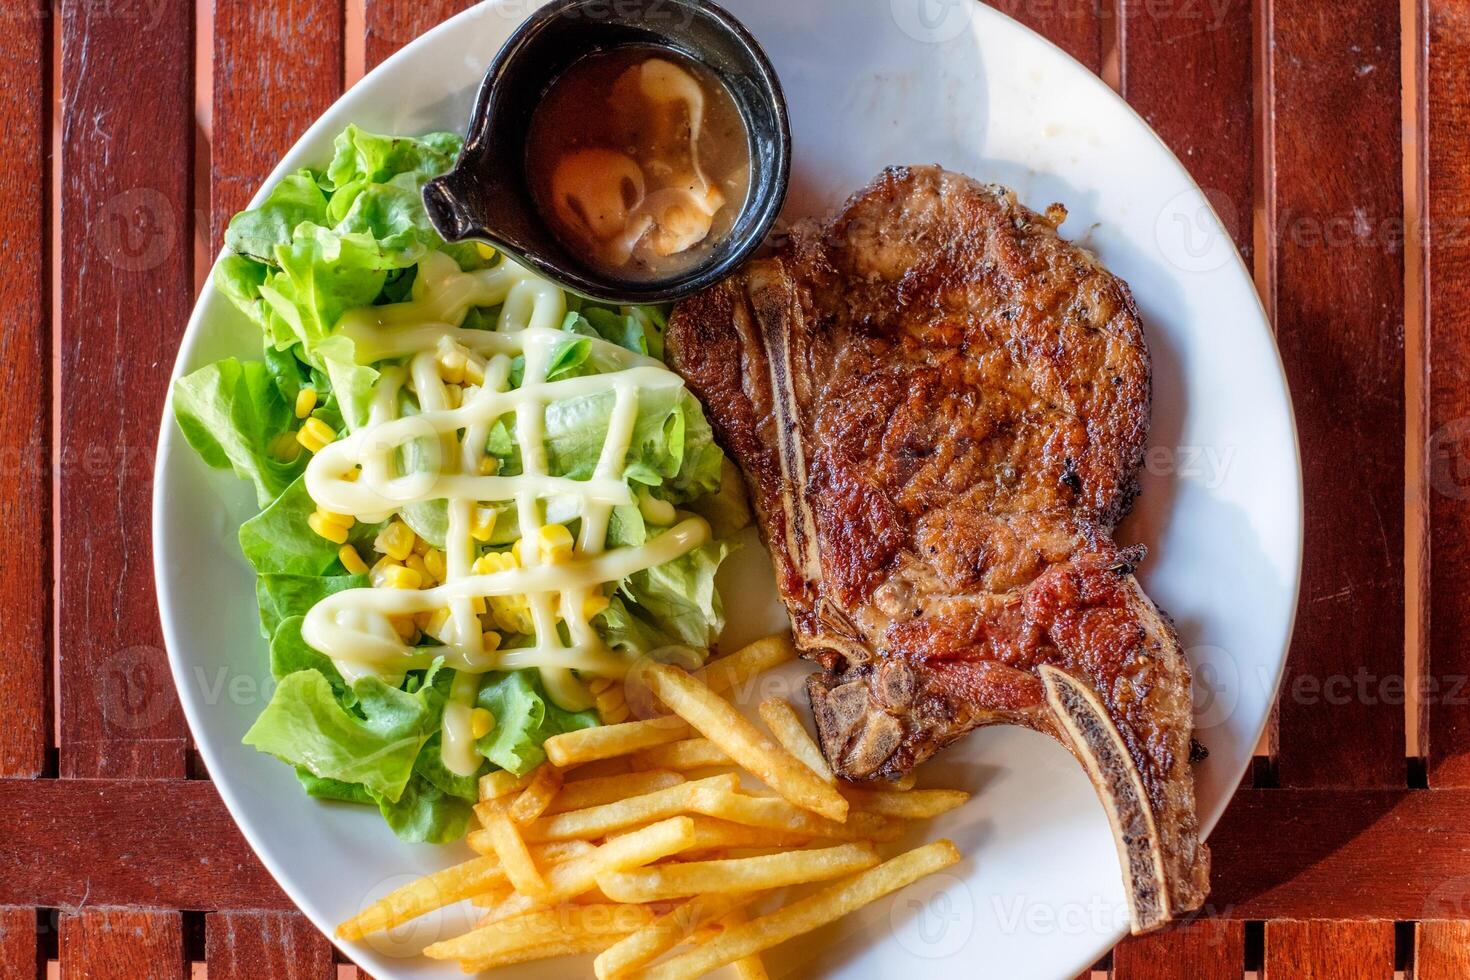 Grilled pork ribs steak well-done with french fries and vegetable photo